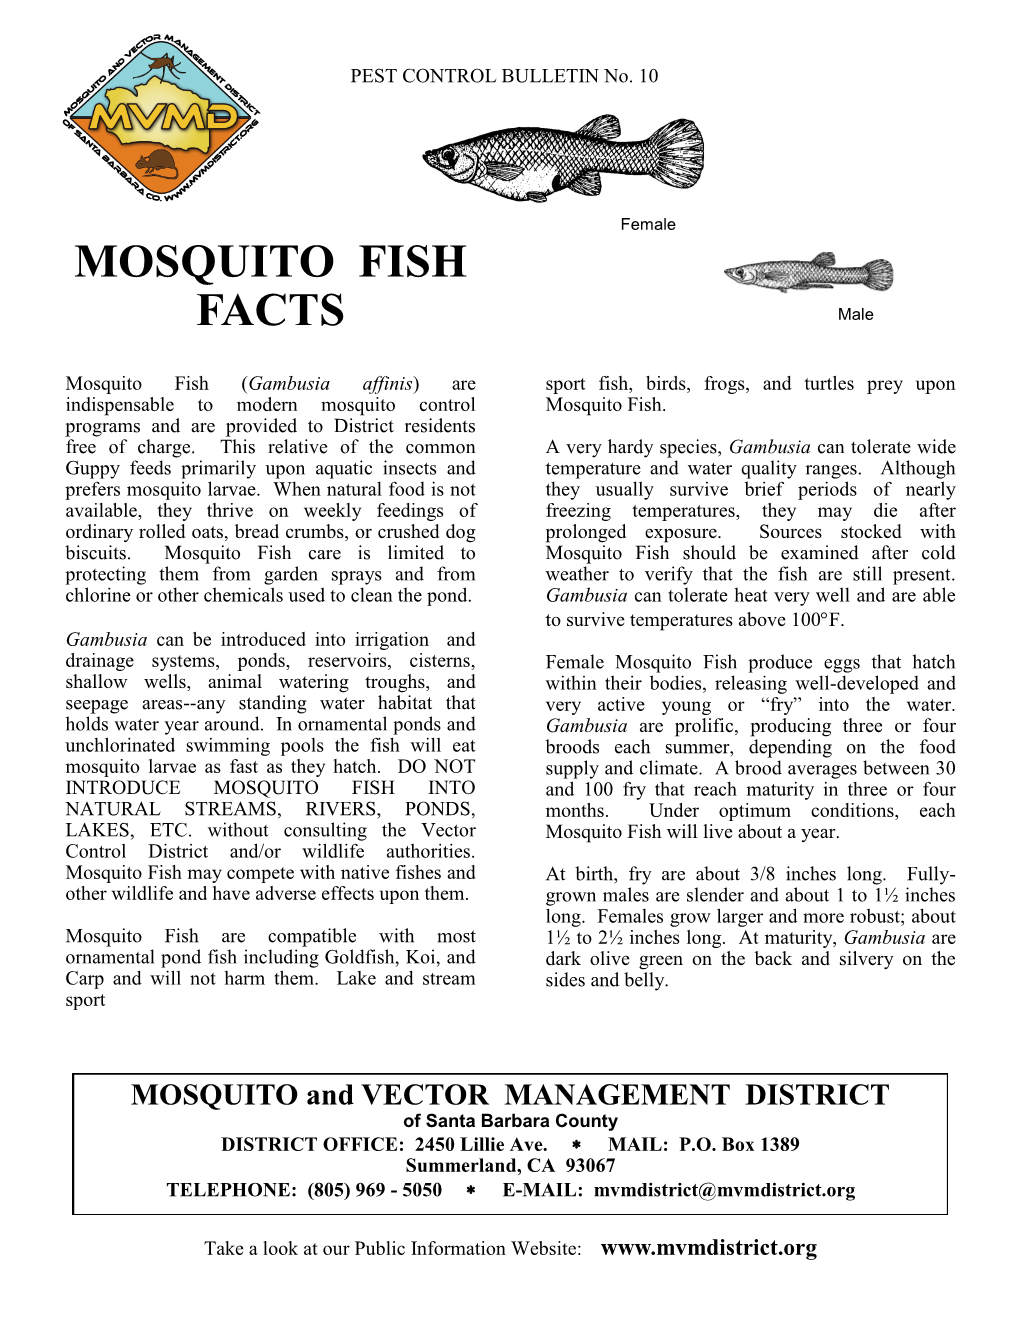 MOSQUITO FISH FACTS Male